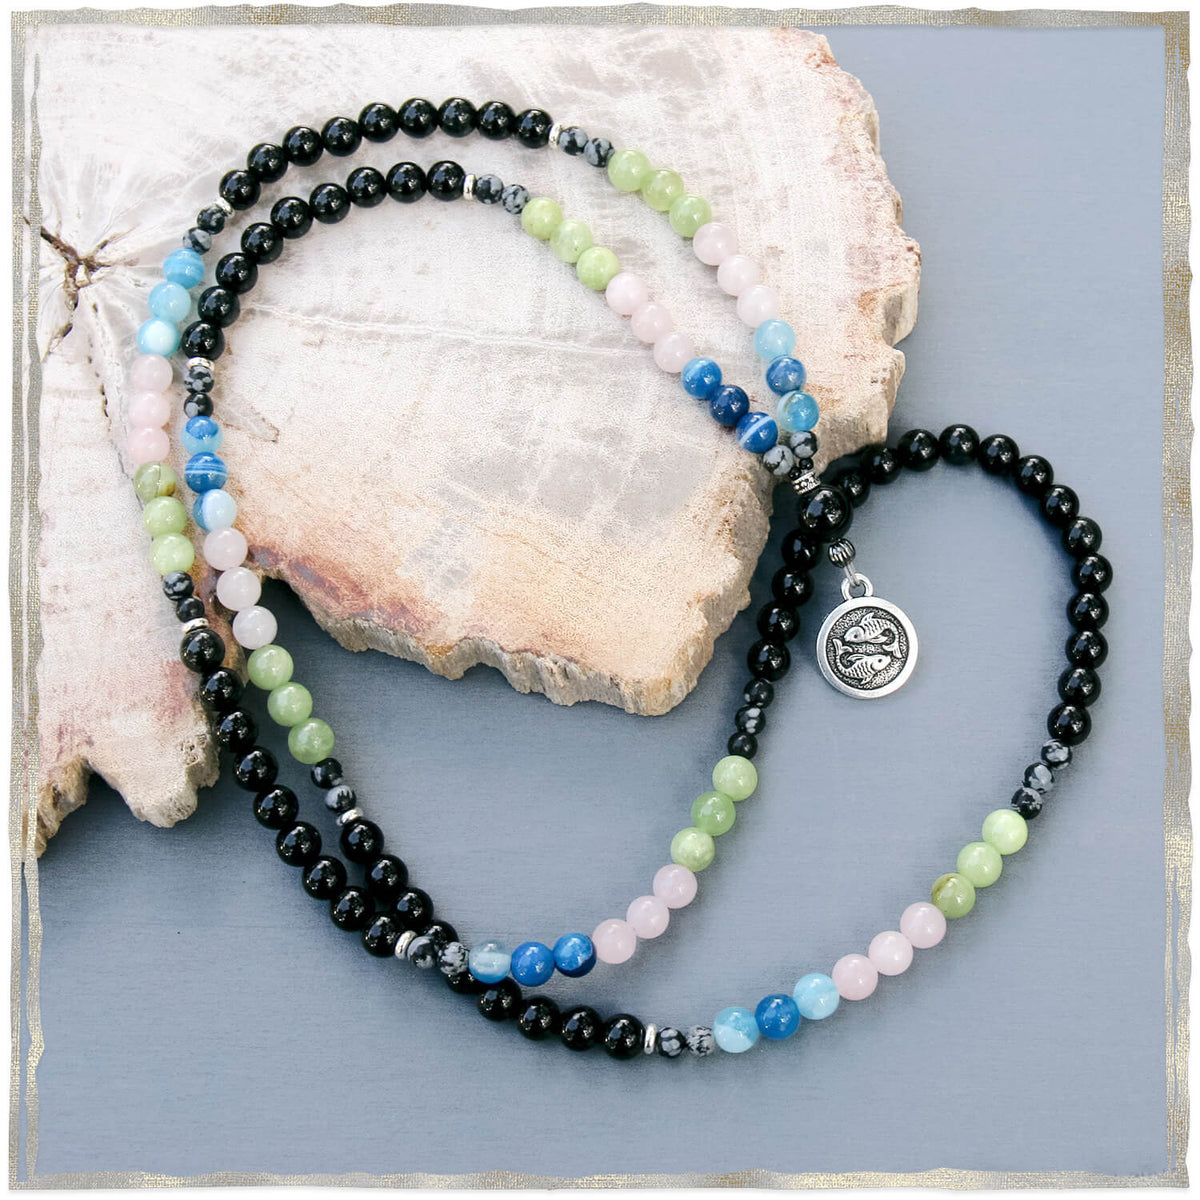 Age of Pisces Mala Necklace